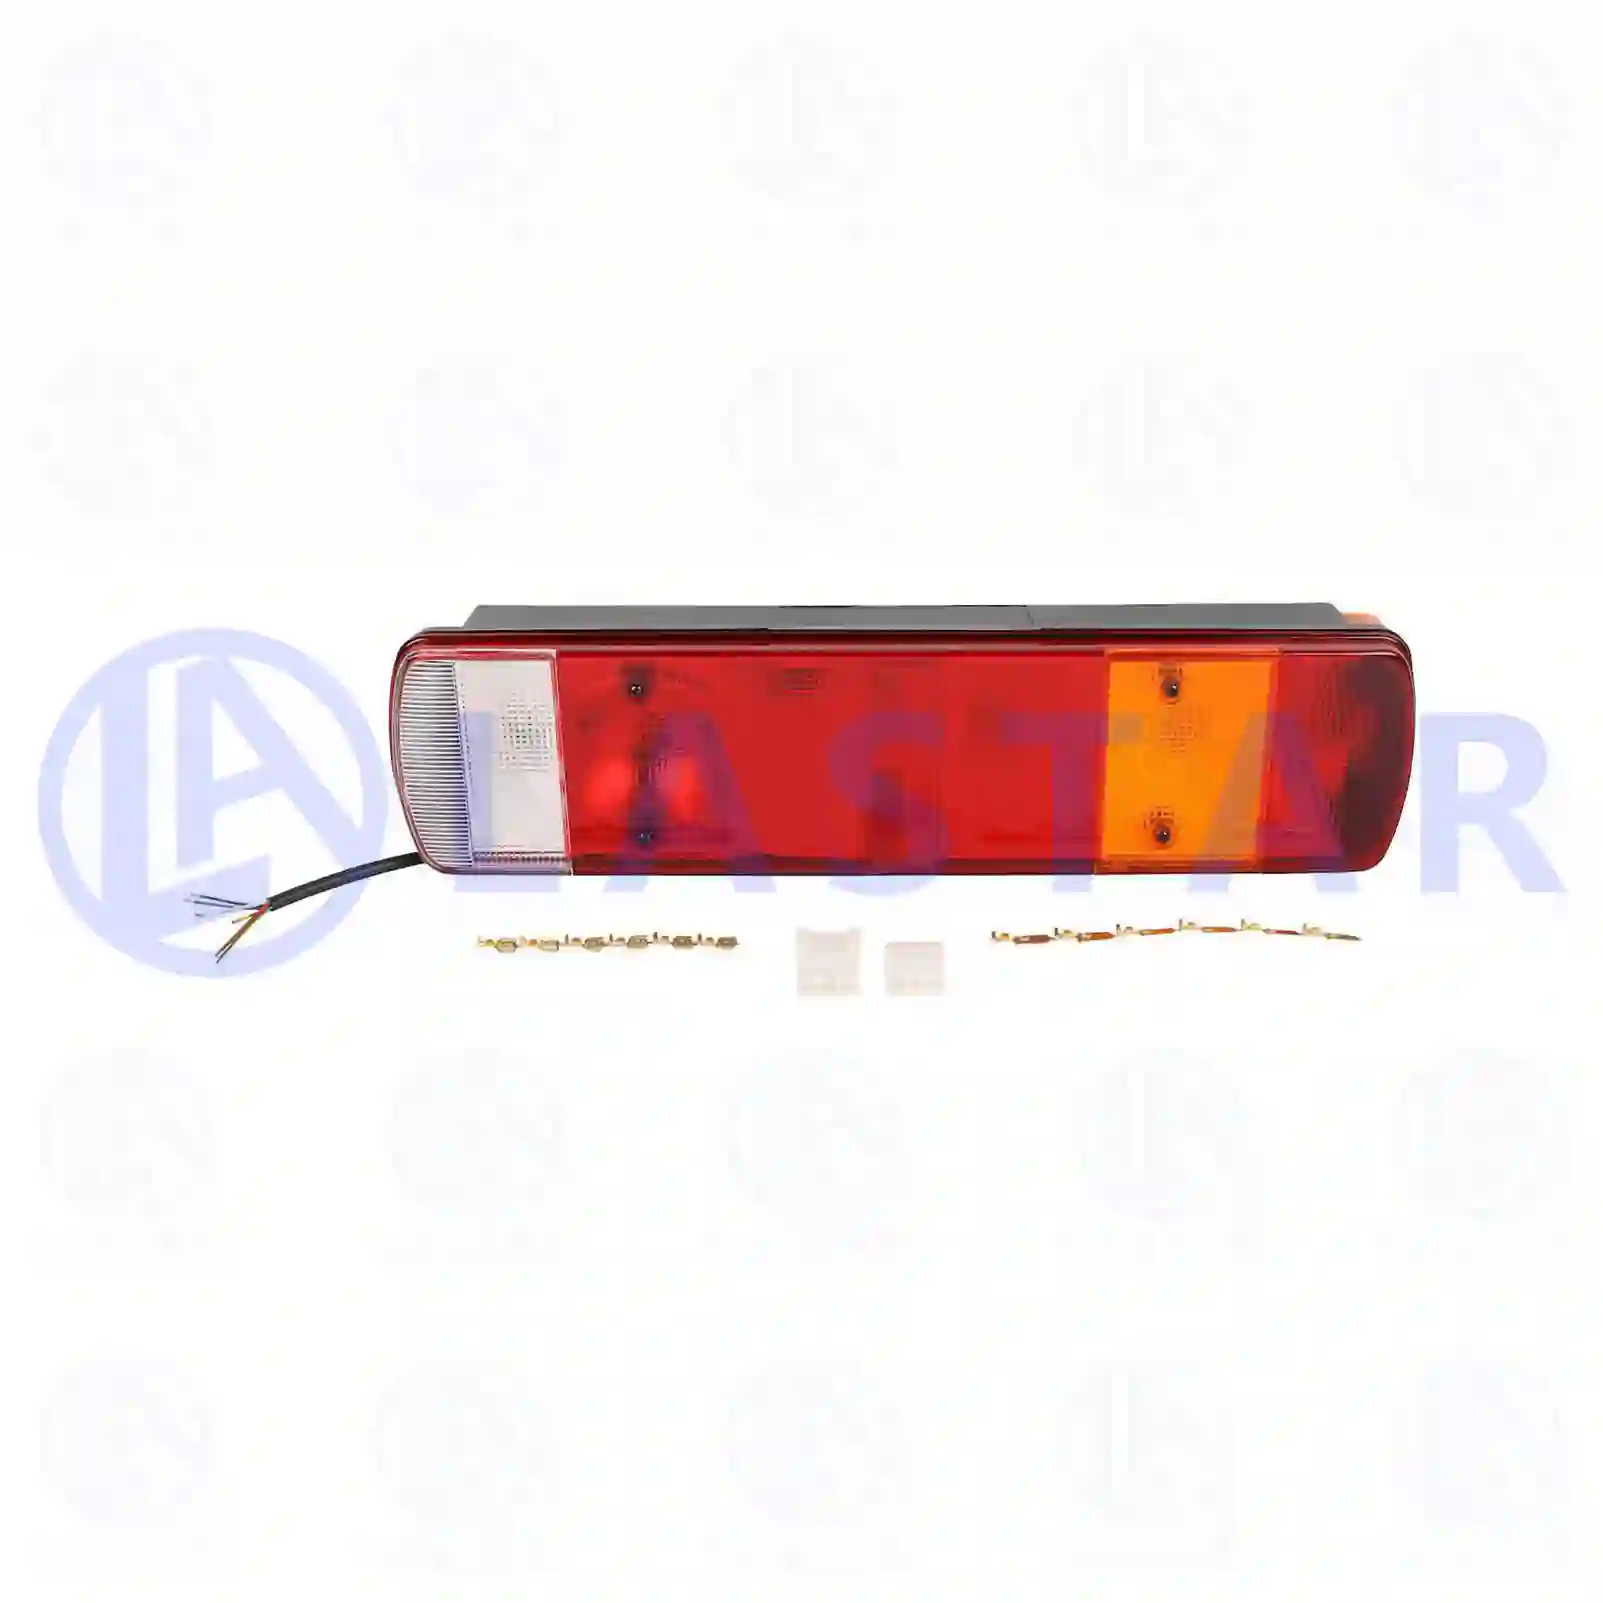 Tail Lamp Tail lamp, right, la no: 77711240 ,  oem no:867500, 36008, 1371975, 1371977, 1371979, 1371981, 1387878, 1397496, 1414367, 1414369, 1436852, 1436853, 1436866, 1436868, 1504603, 1504606, 1504609, 1508177, 504609 Lastar Spare Part | Truck Spare Parts, Auotomotive Spare Parts